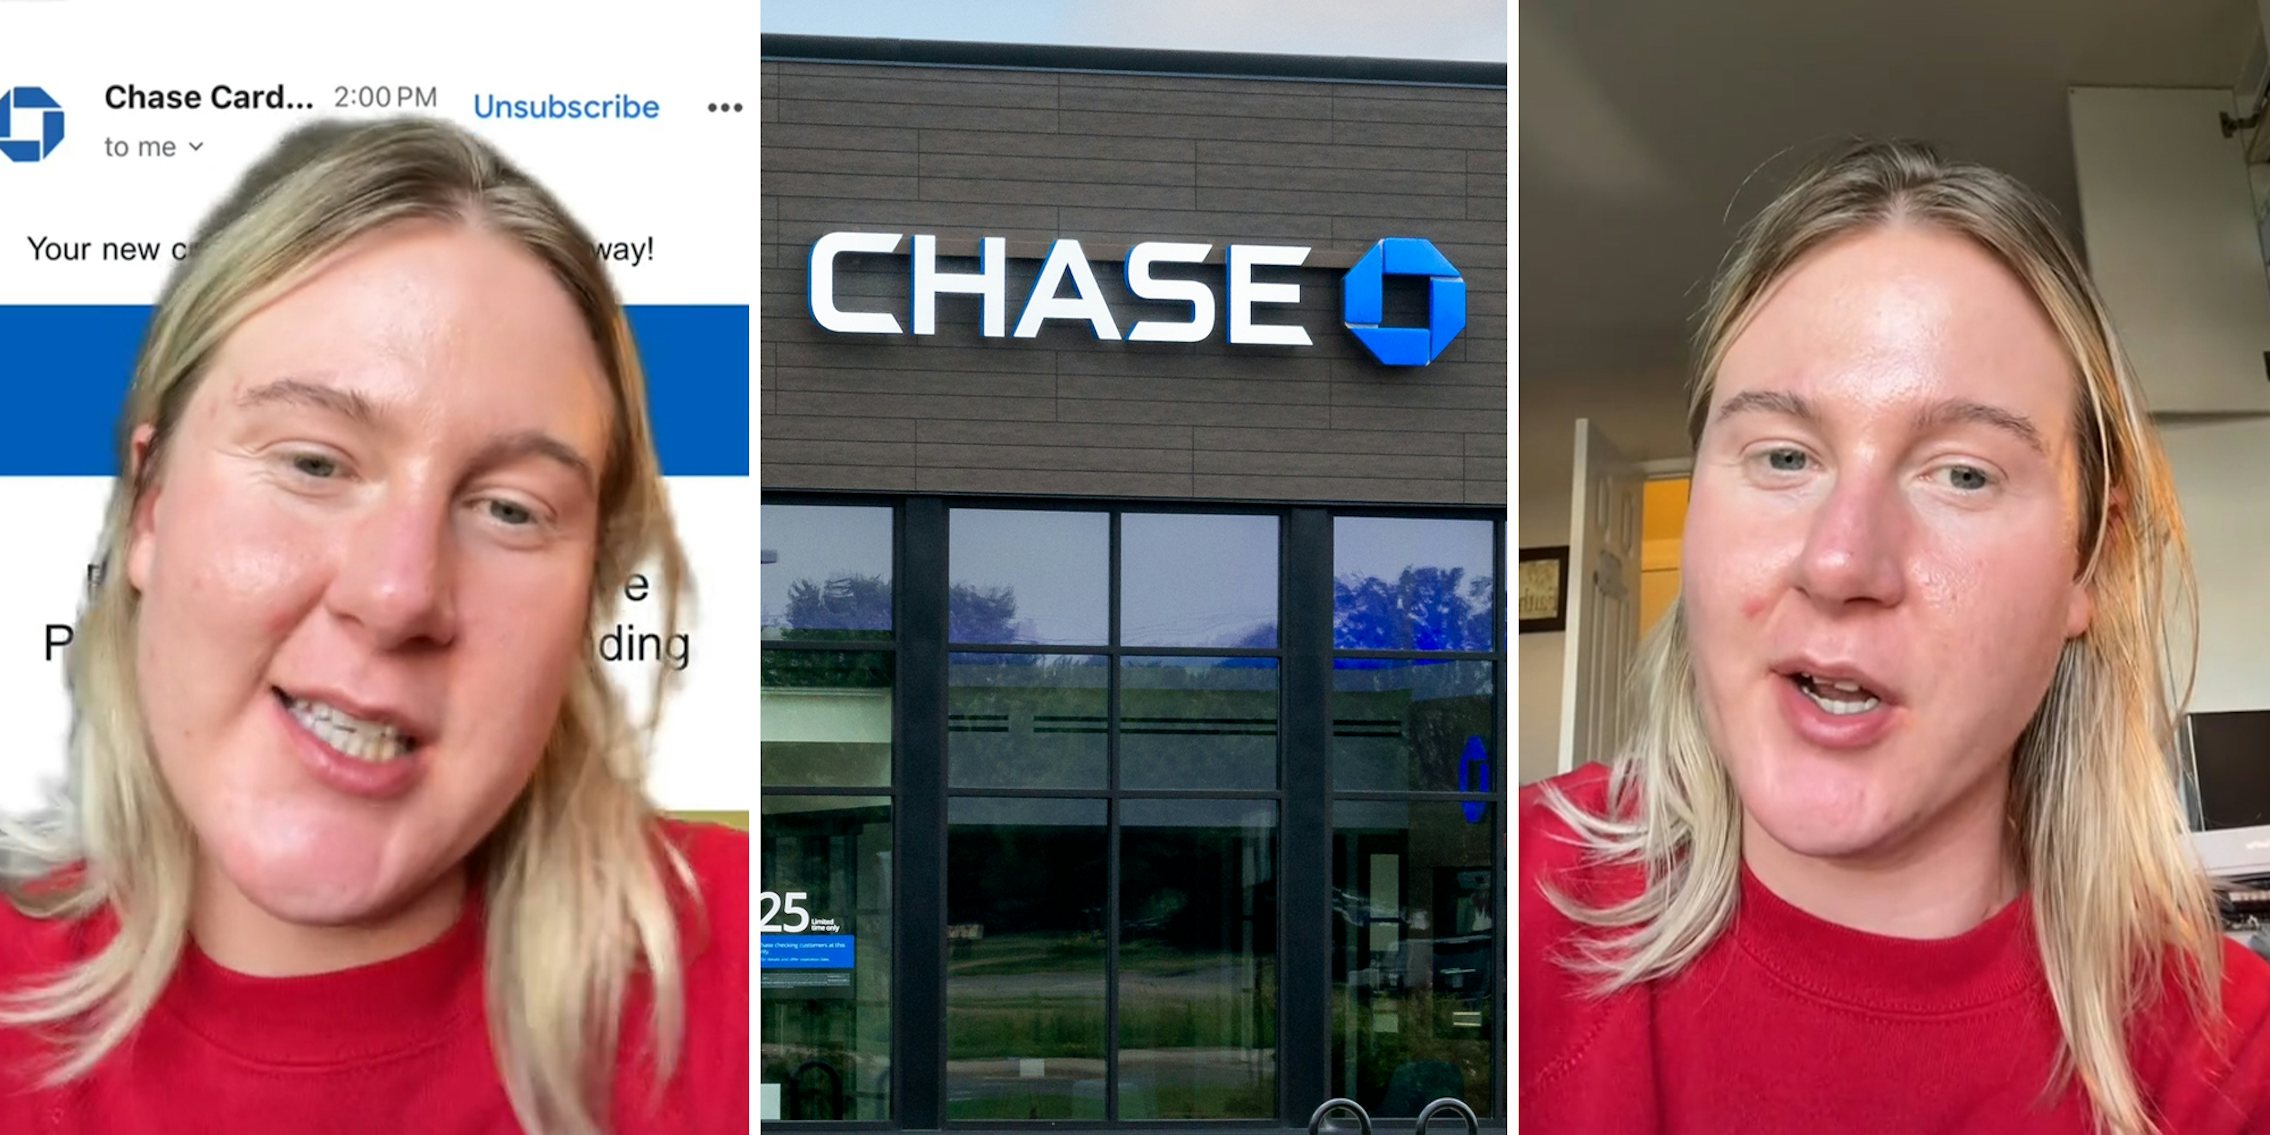 Chase customer says bank raised her credit card limit